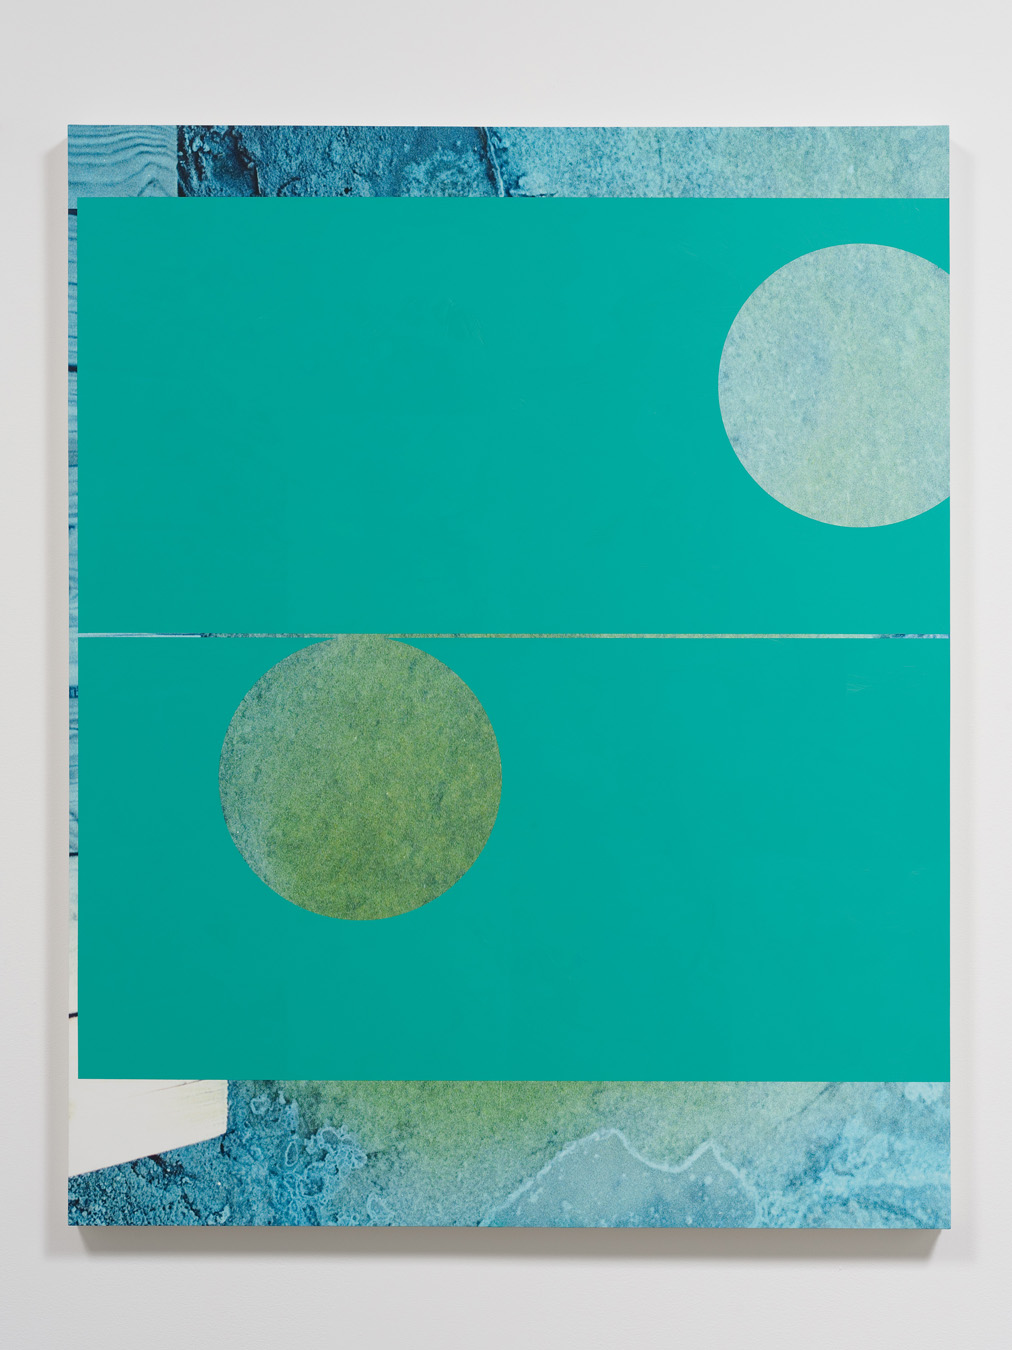  Salton Sea (dock), 2012  Oil and UV cured ink on canvas over panel  60 x 48 inches  152.4 x 121.92 cm       